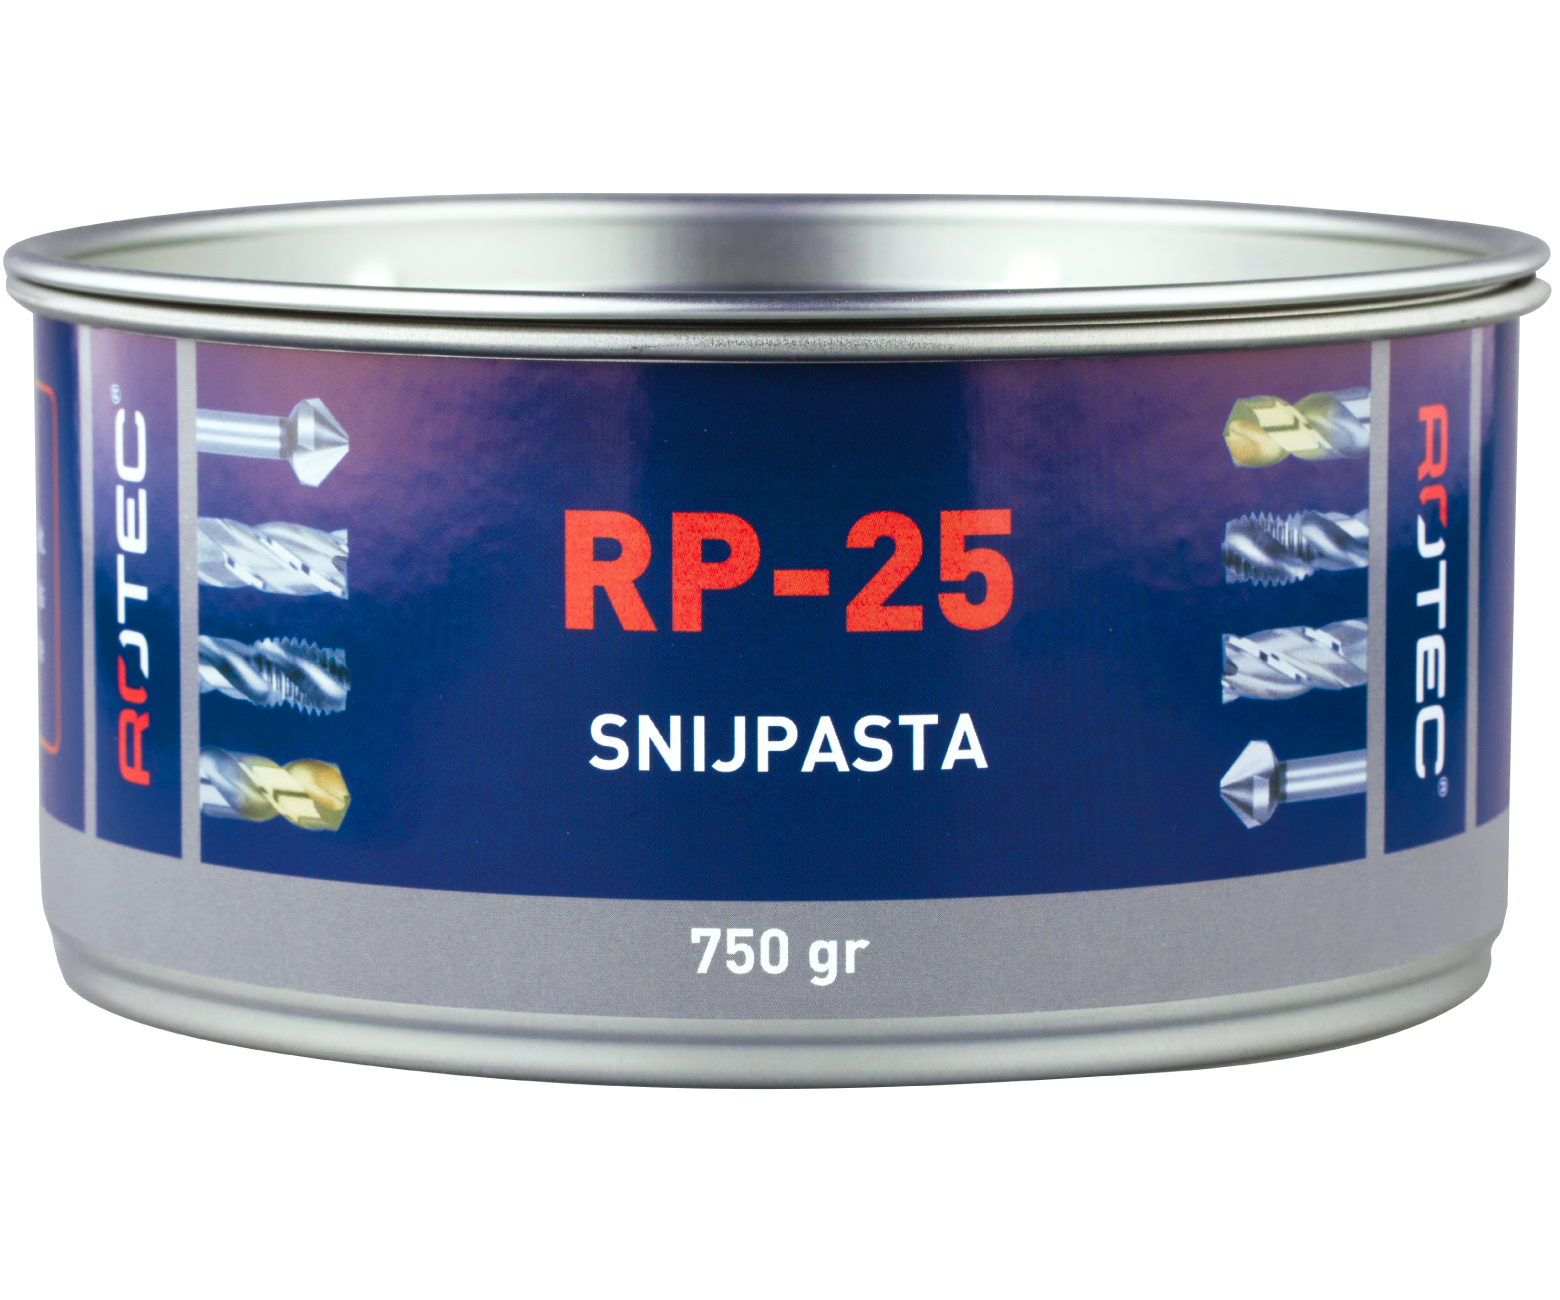 RP-25 cutting paste in tin can of 750 gram